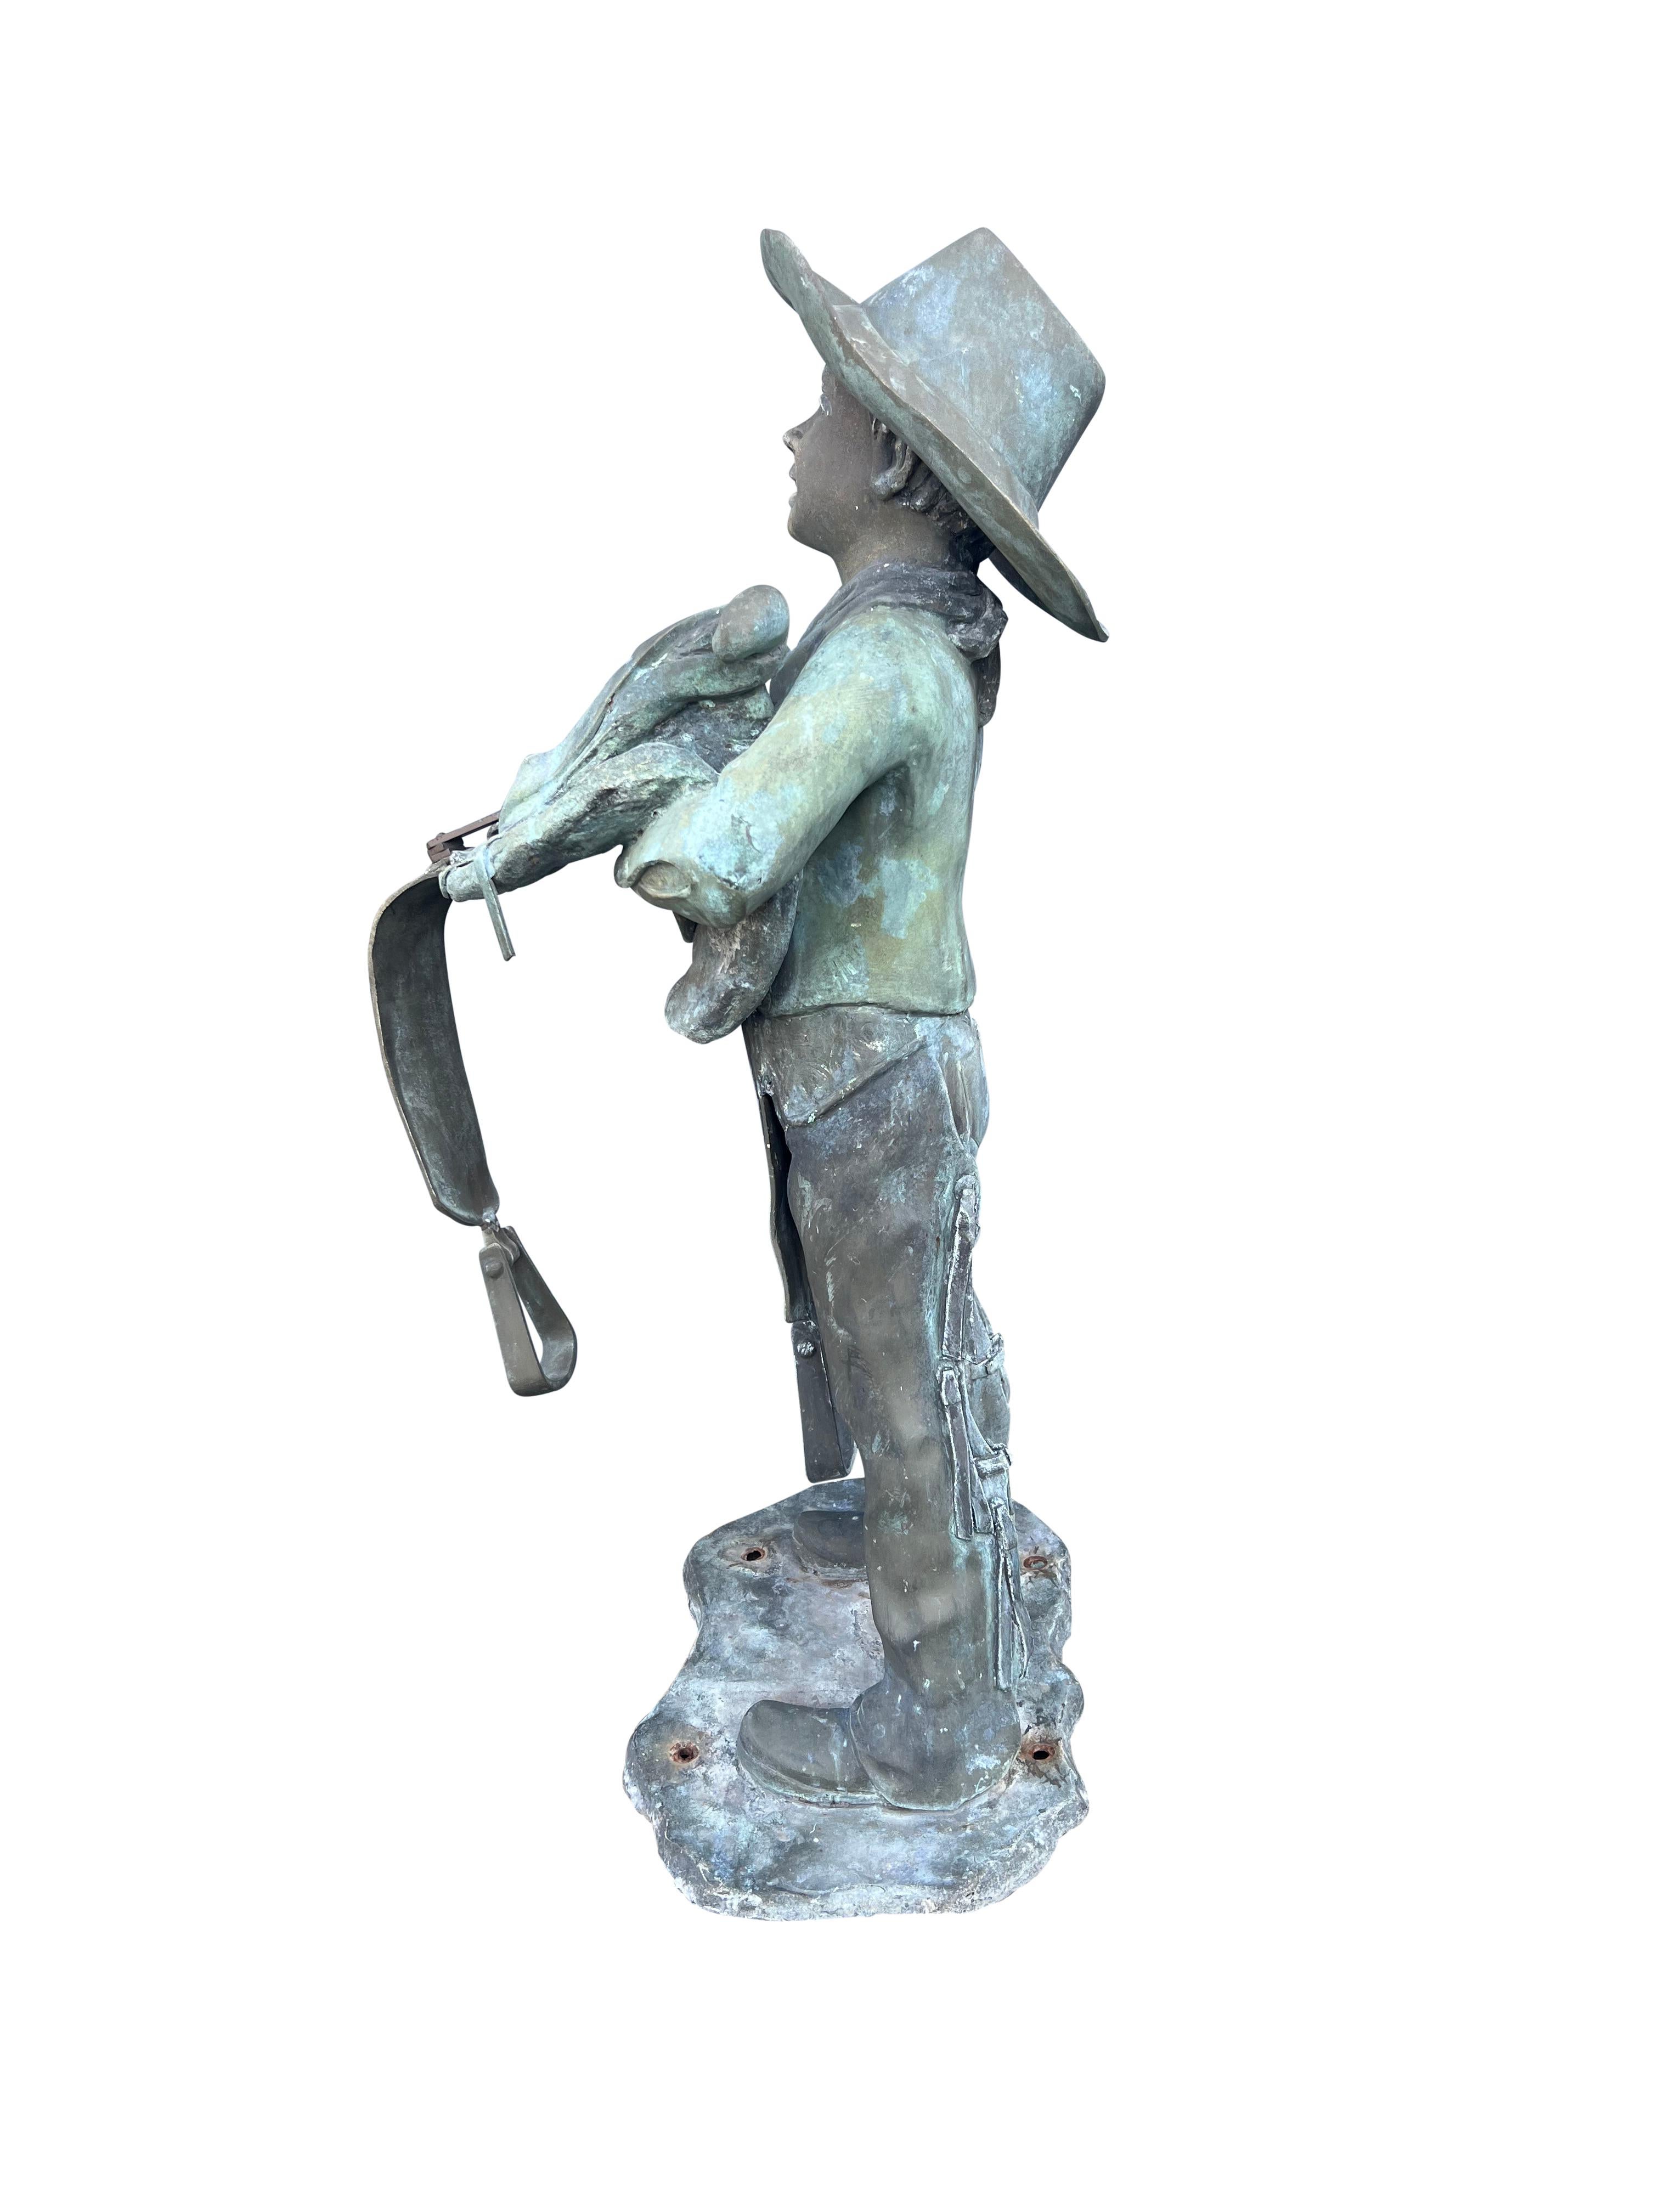 American Life Size Bronze of a Young Boy Holding a Saddle 1